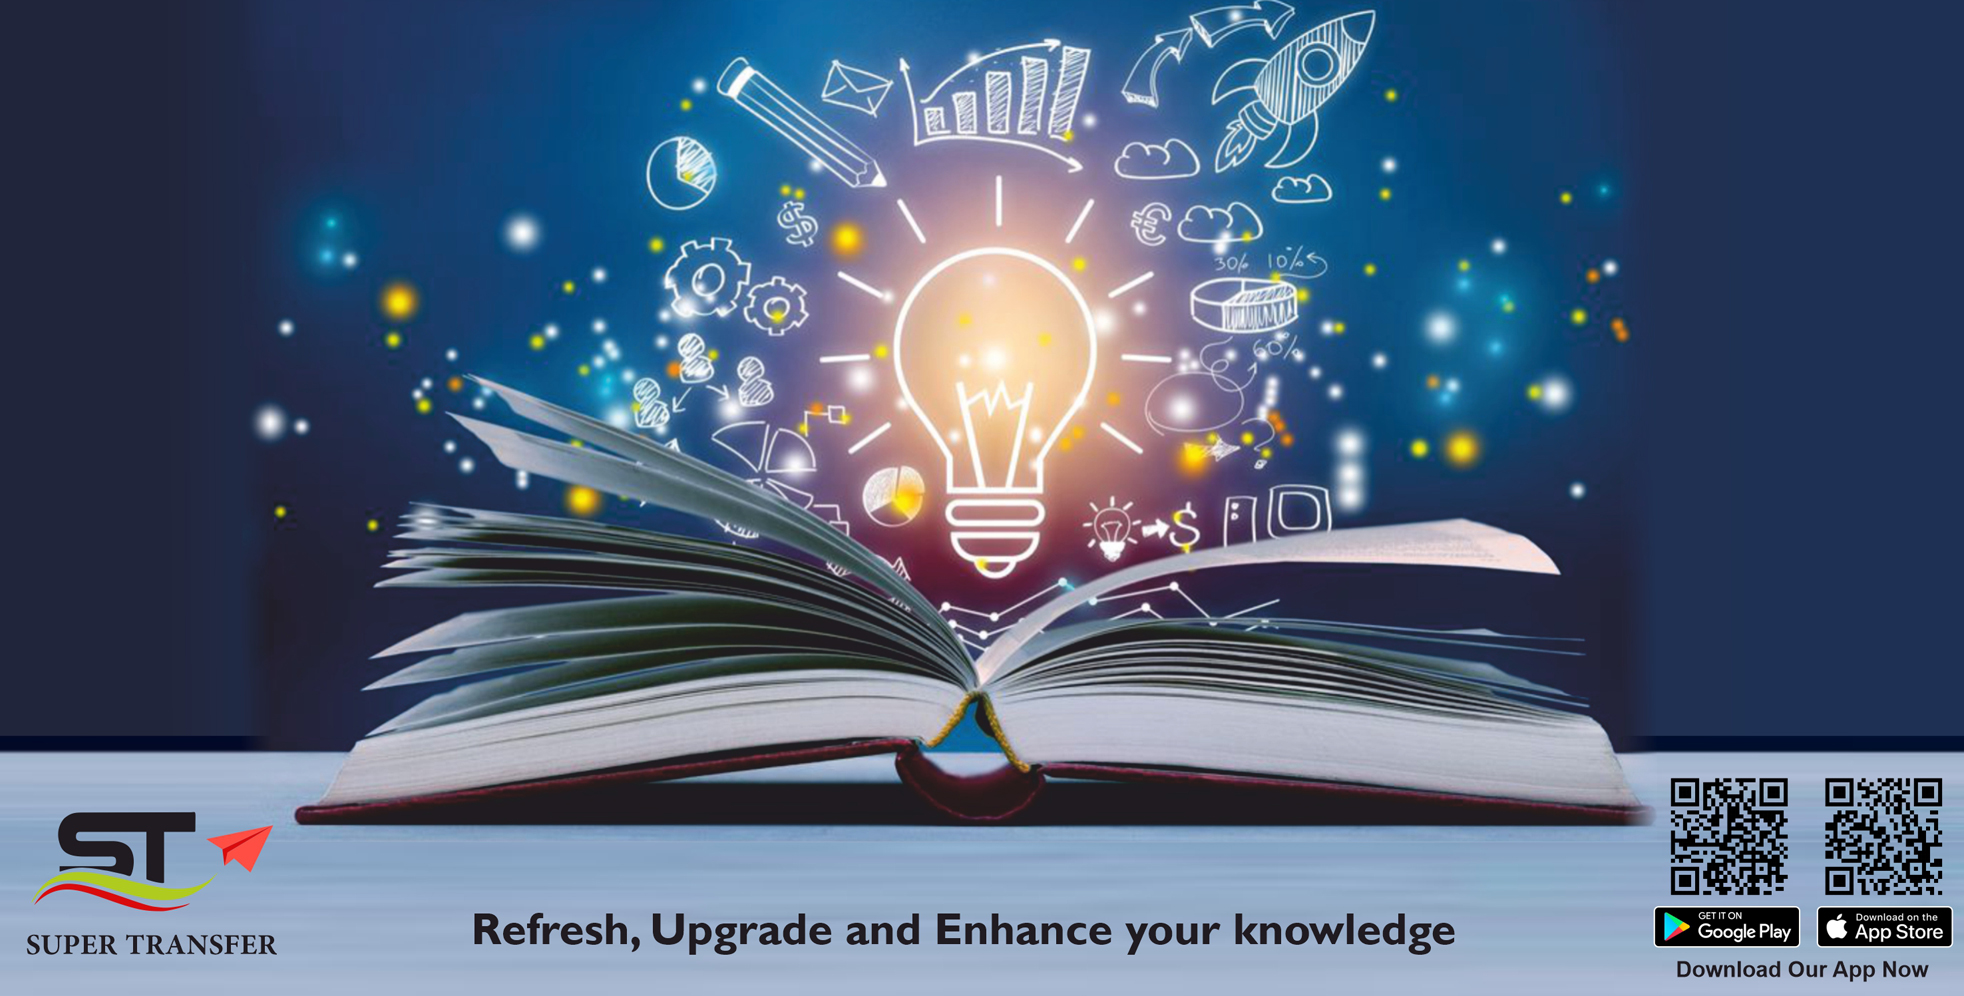 Education - Refresh, Upgrade and Enhance your knowledge